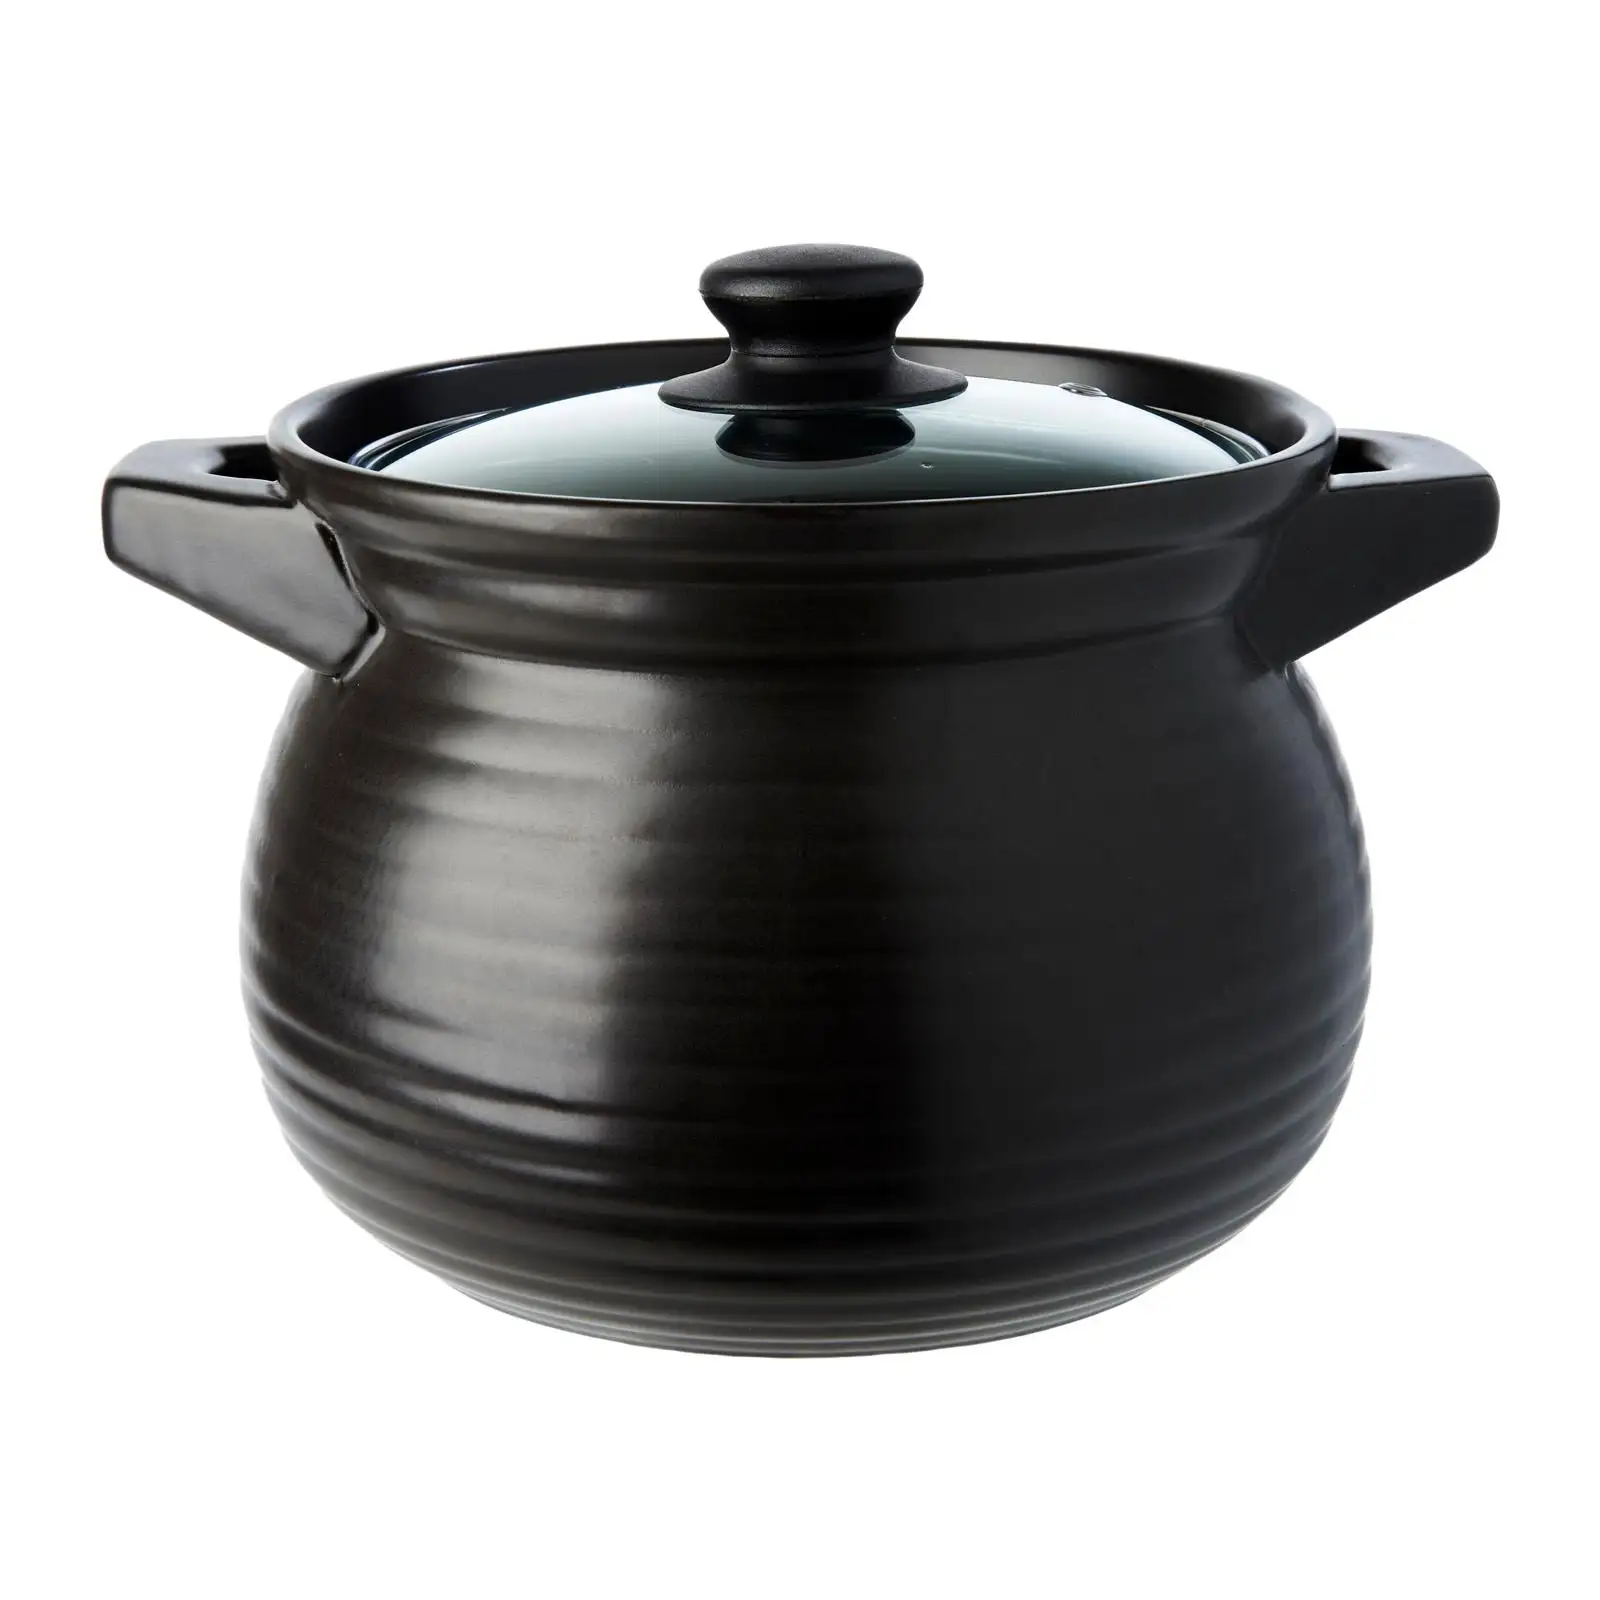 4L Black Color Ceramic Stew Soup Pot With Pot Cover Diameter 22.5 H16.5cm Heats up faster and retains heat much longer